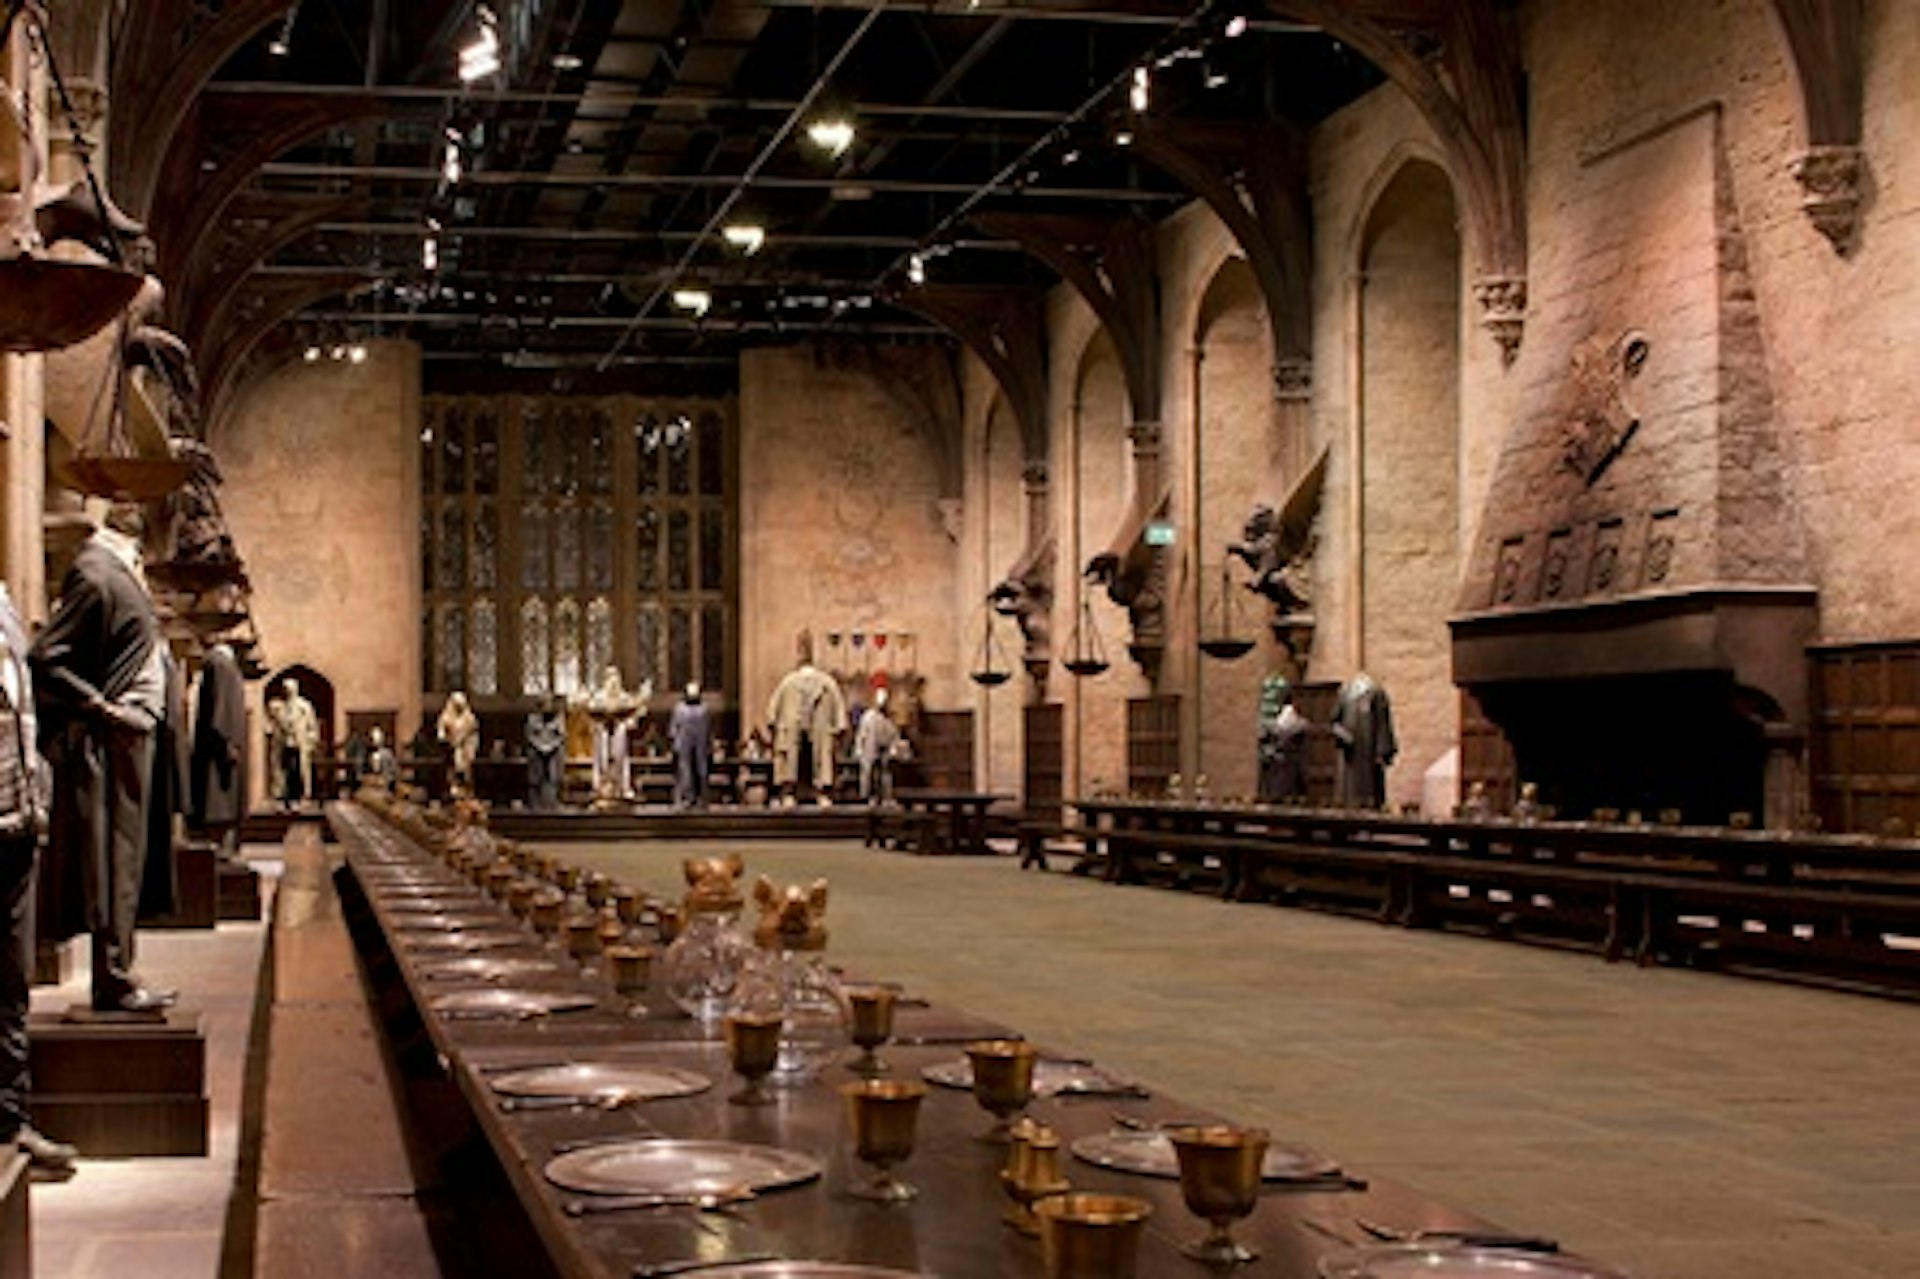 Warner Bros. Studio Tour London - The Making of Harry Potter with Return Transportation for One Adult 3